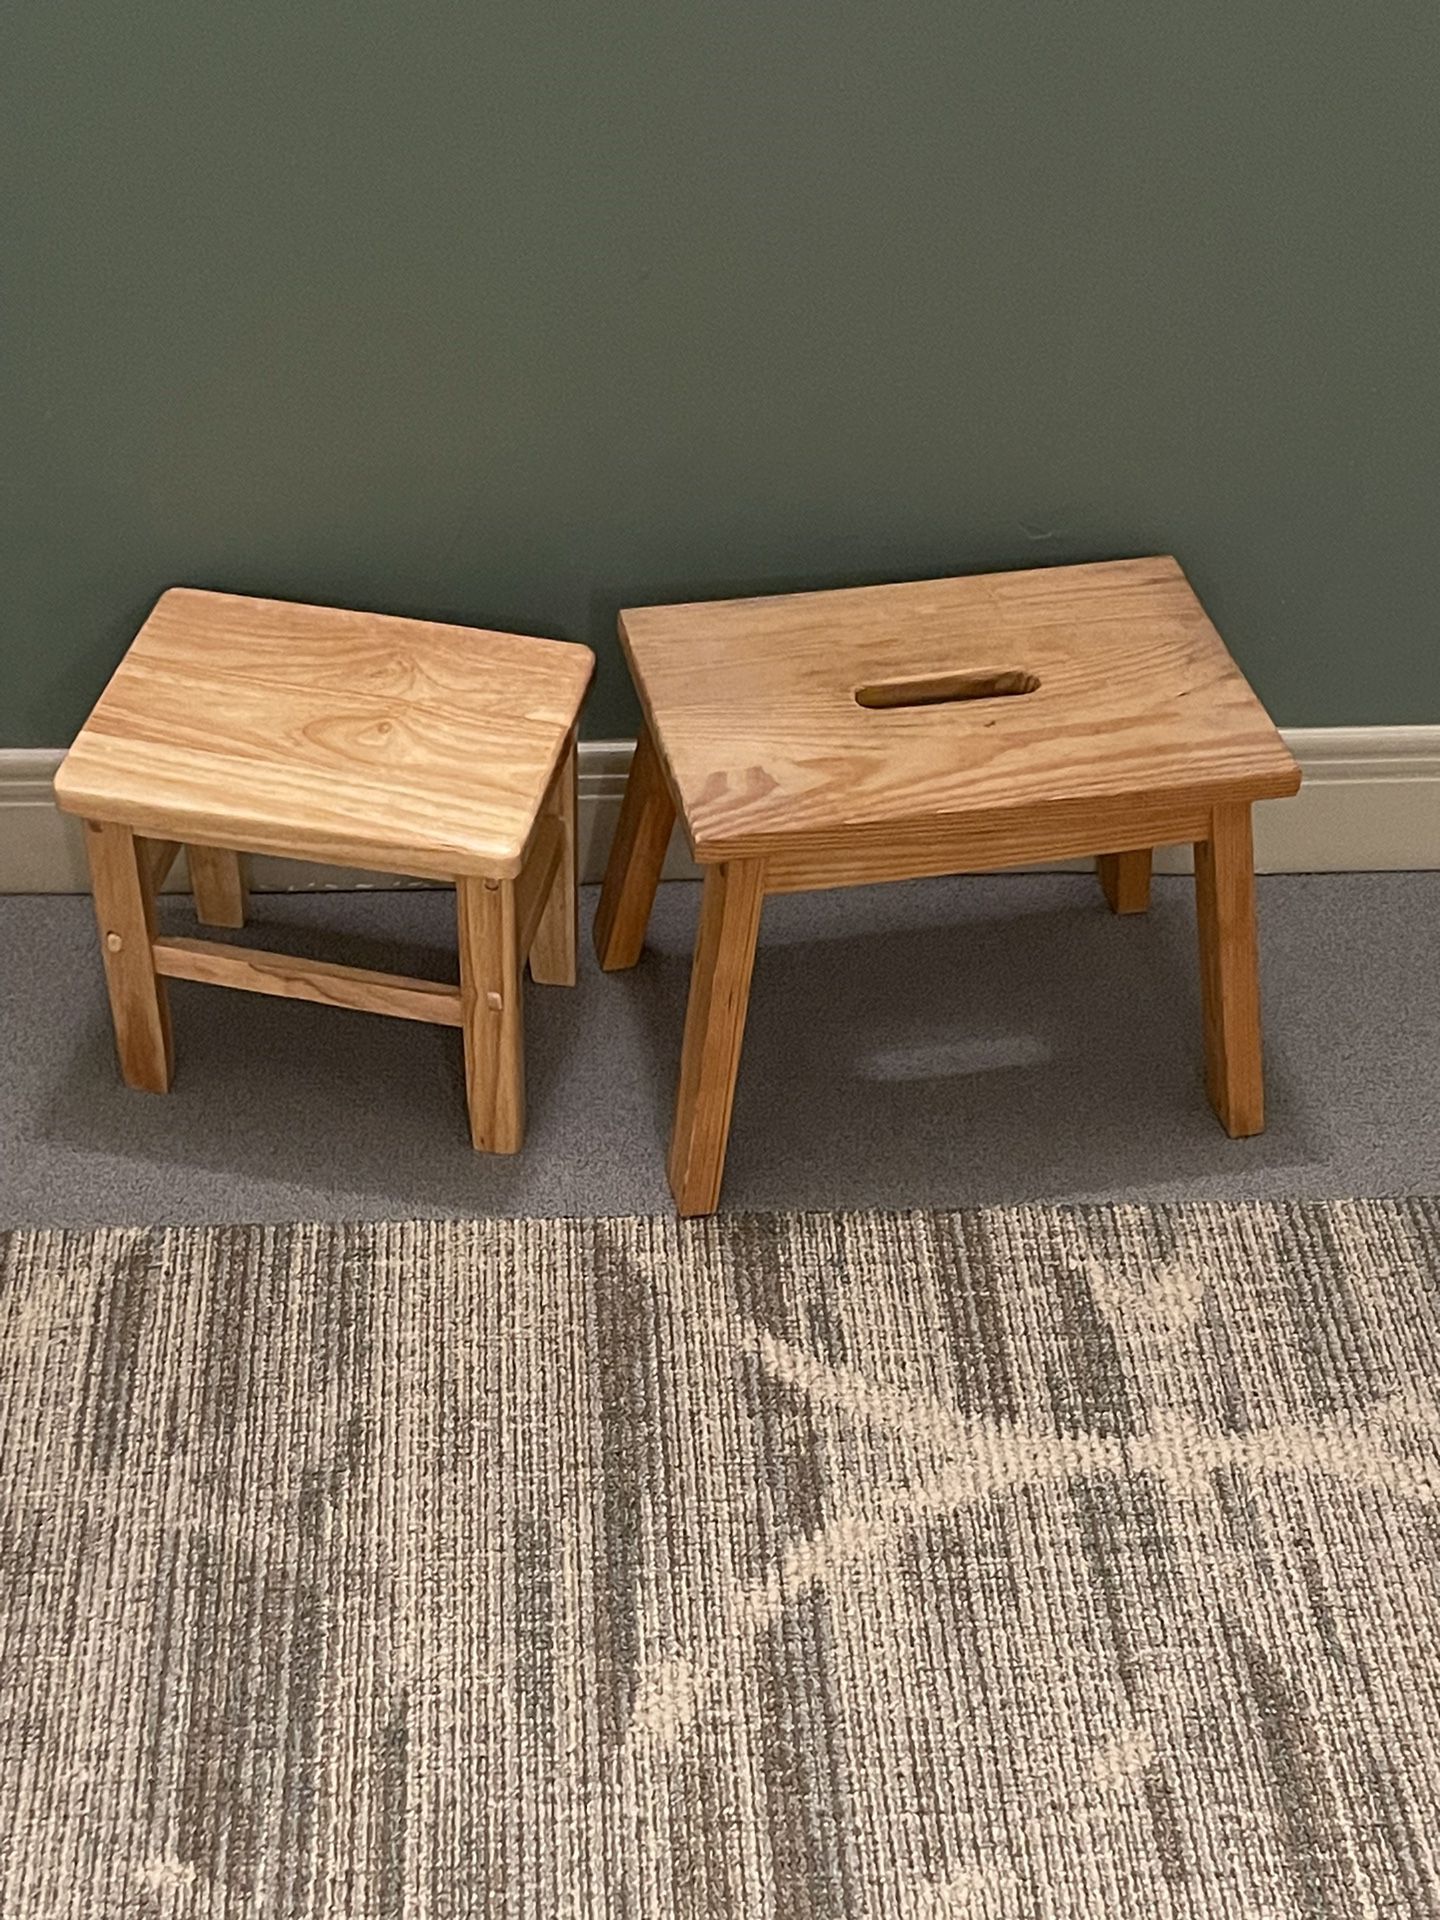 TWO (2) Small SOLID WOOD STEP STOOLS - firm prices